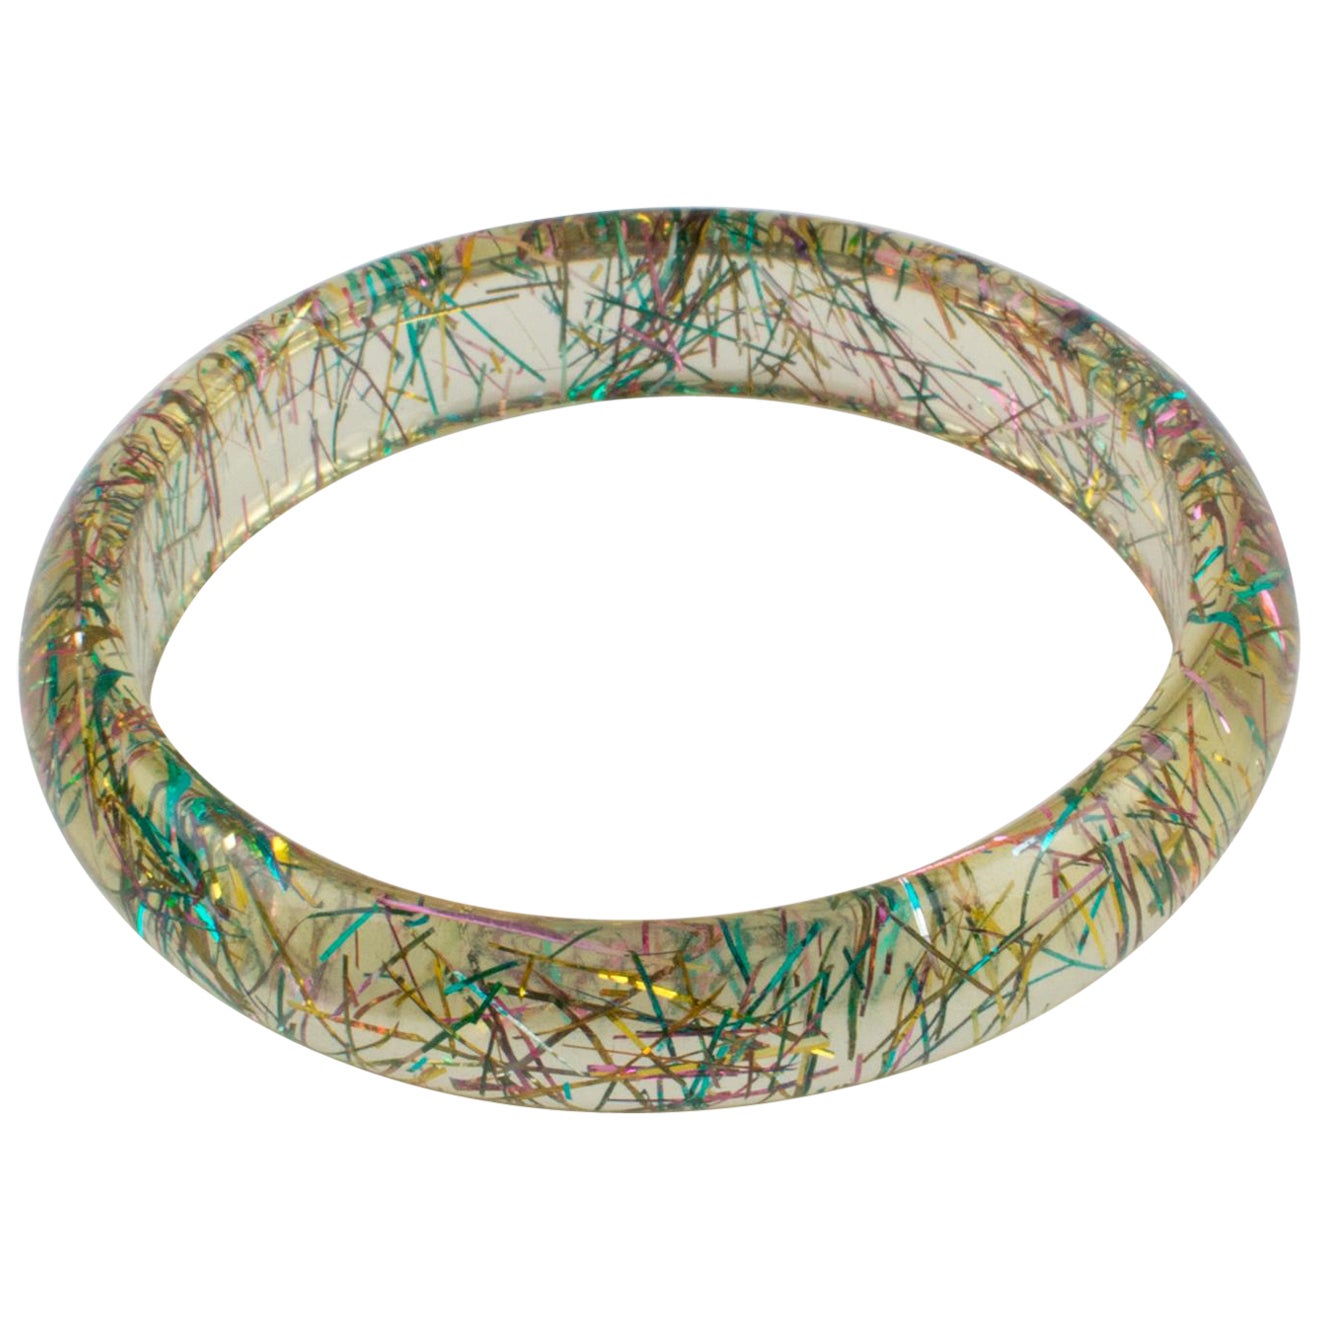 This lovely Lucite bracelet bangle has a domed shape and is comprised of transparent Lucite, injected with metallic thread inclusions in multicolor tones. The metallic threads sparkle as those of Christmas tinsels. There is no visible maker's